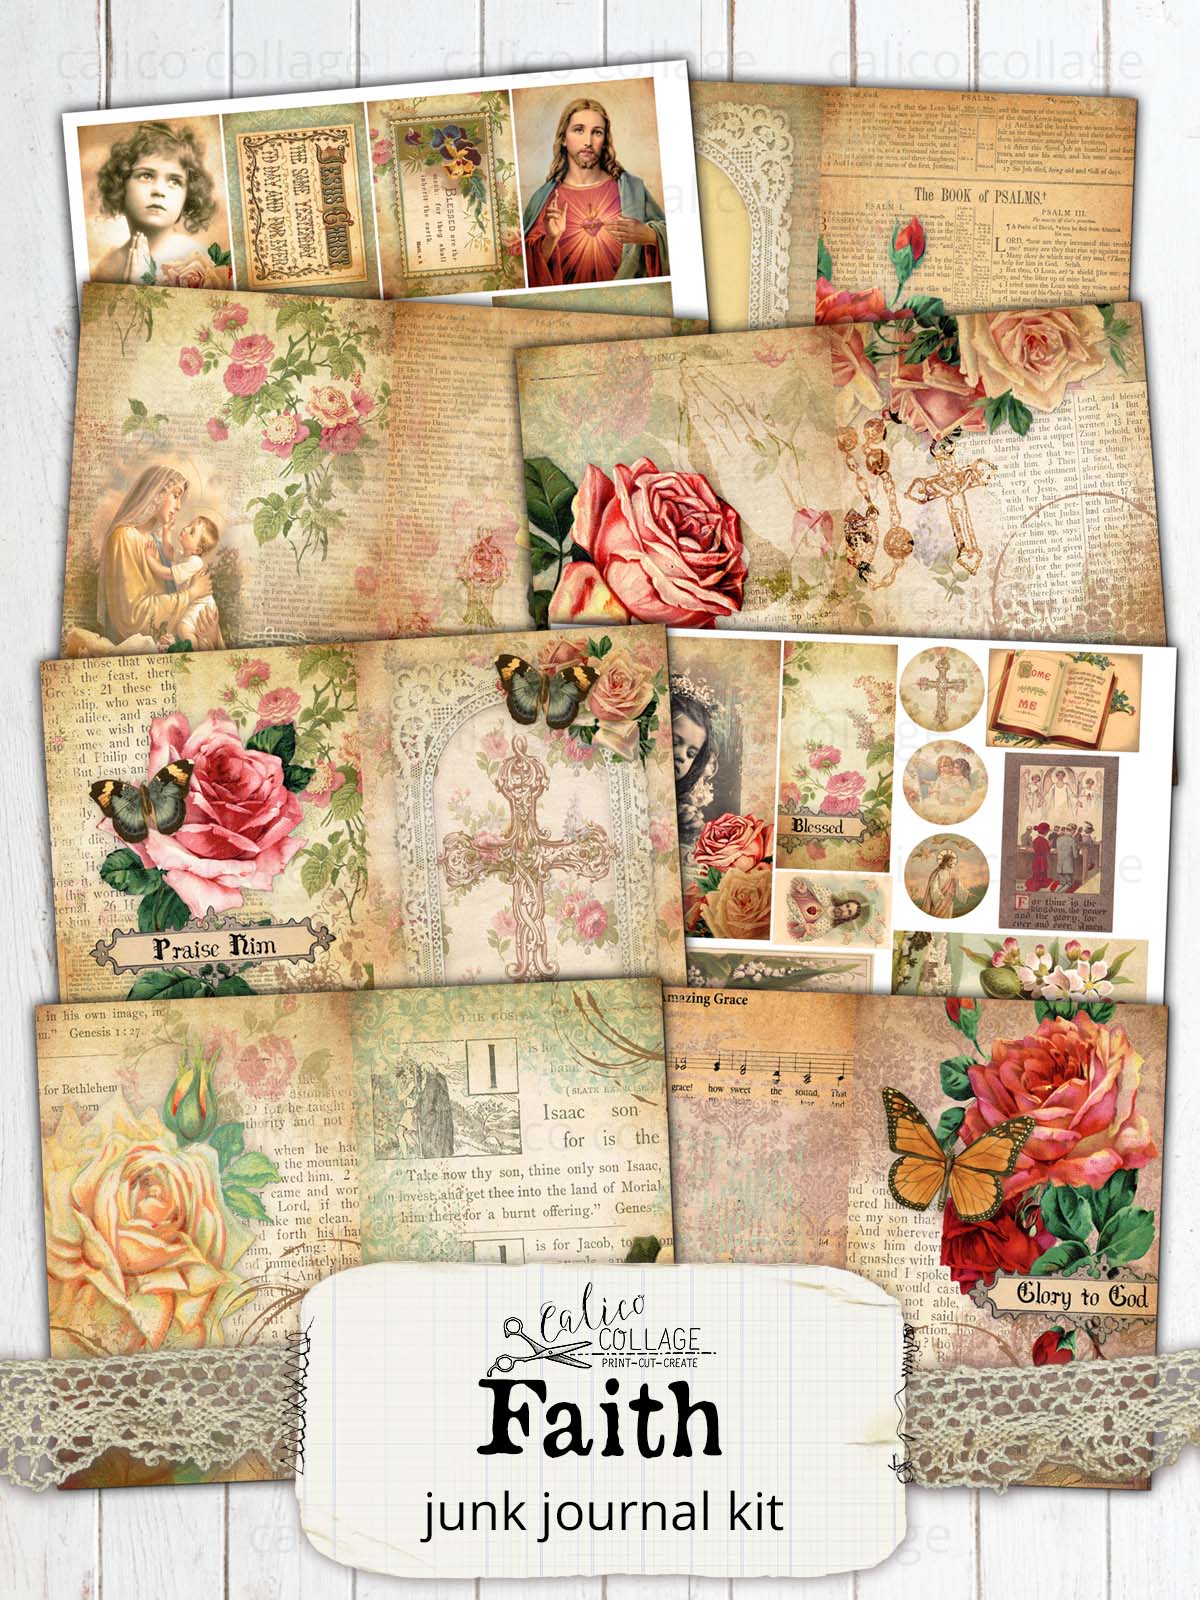 Free Junk Journal and Scrapbook Printables and Images